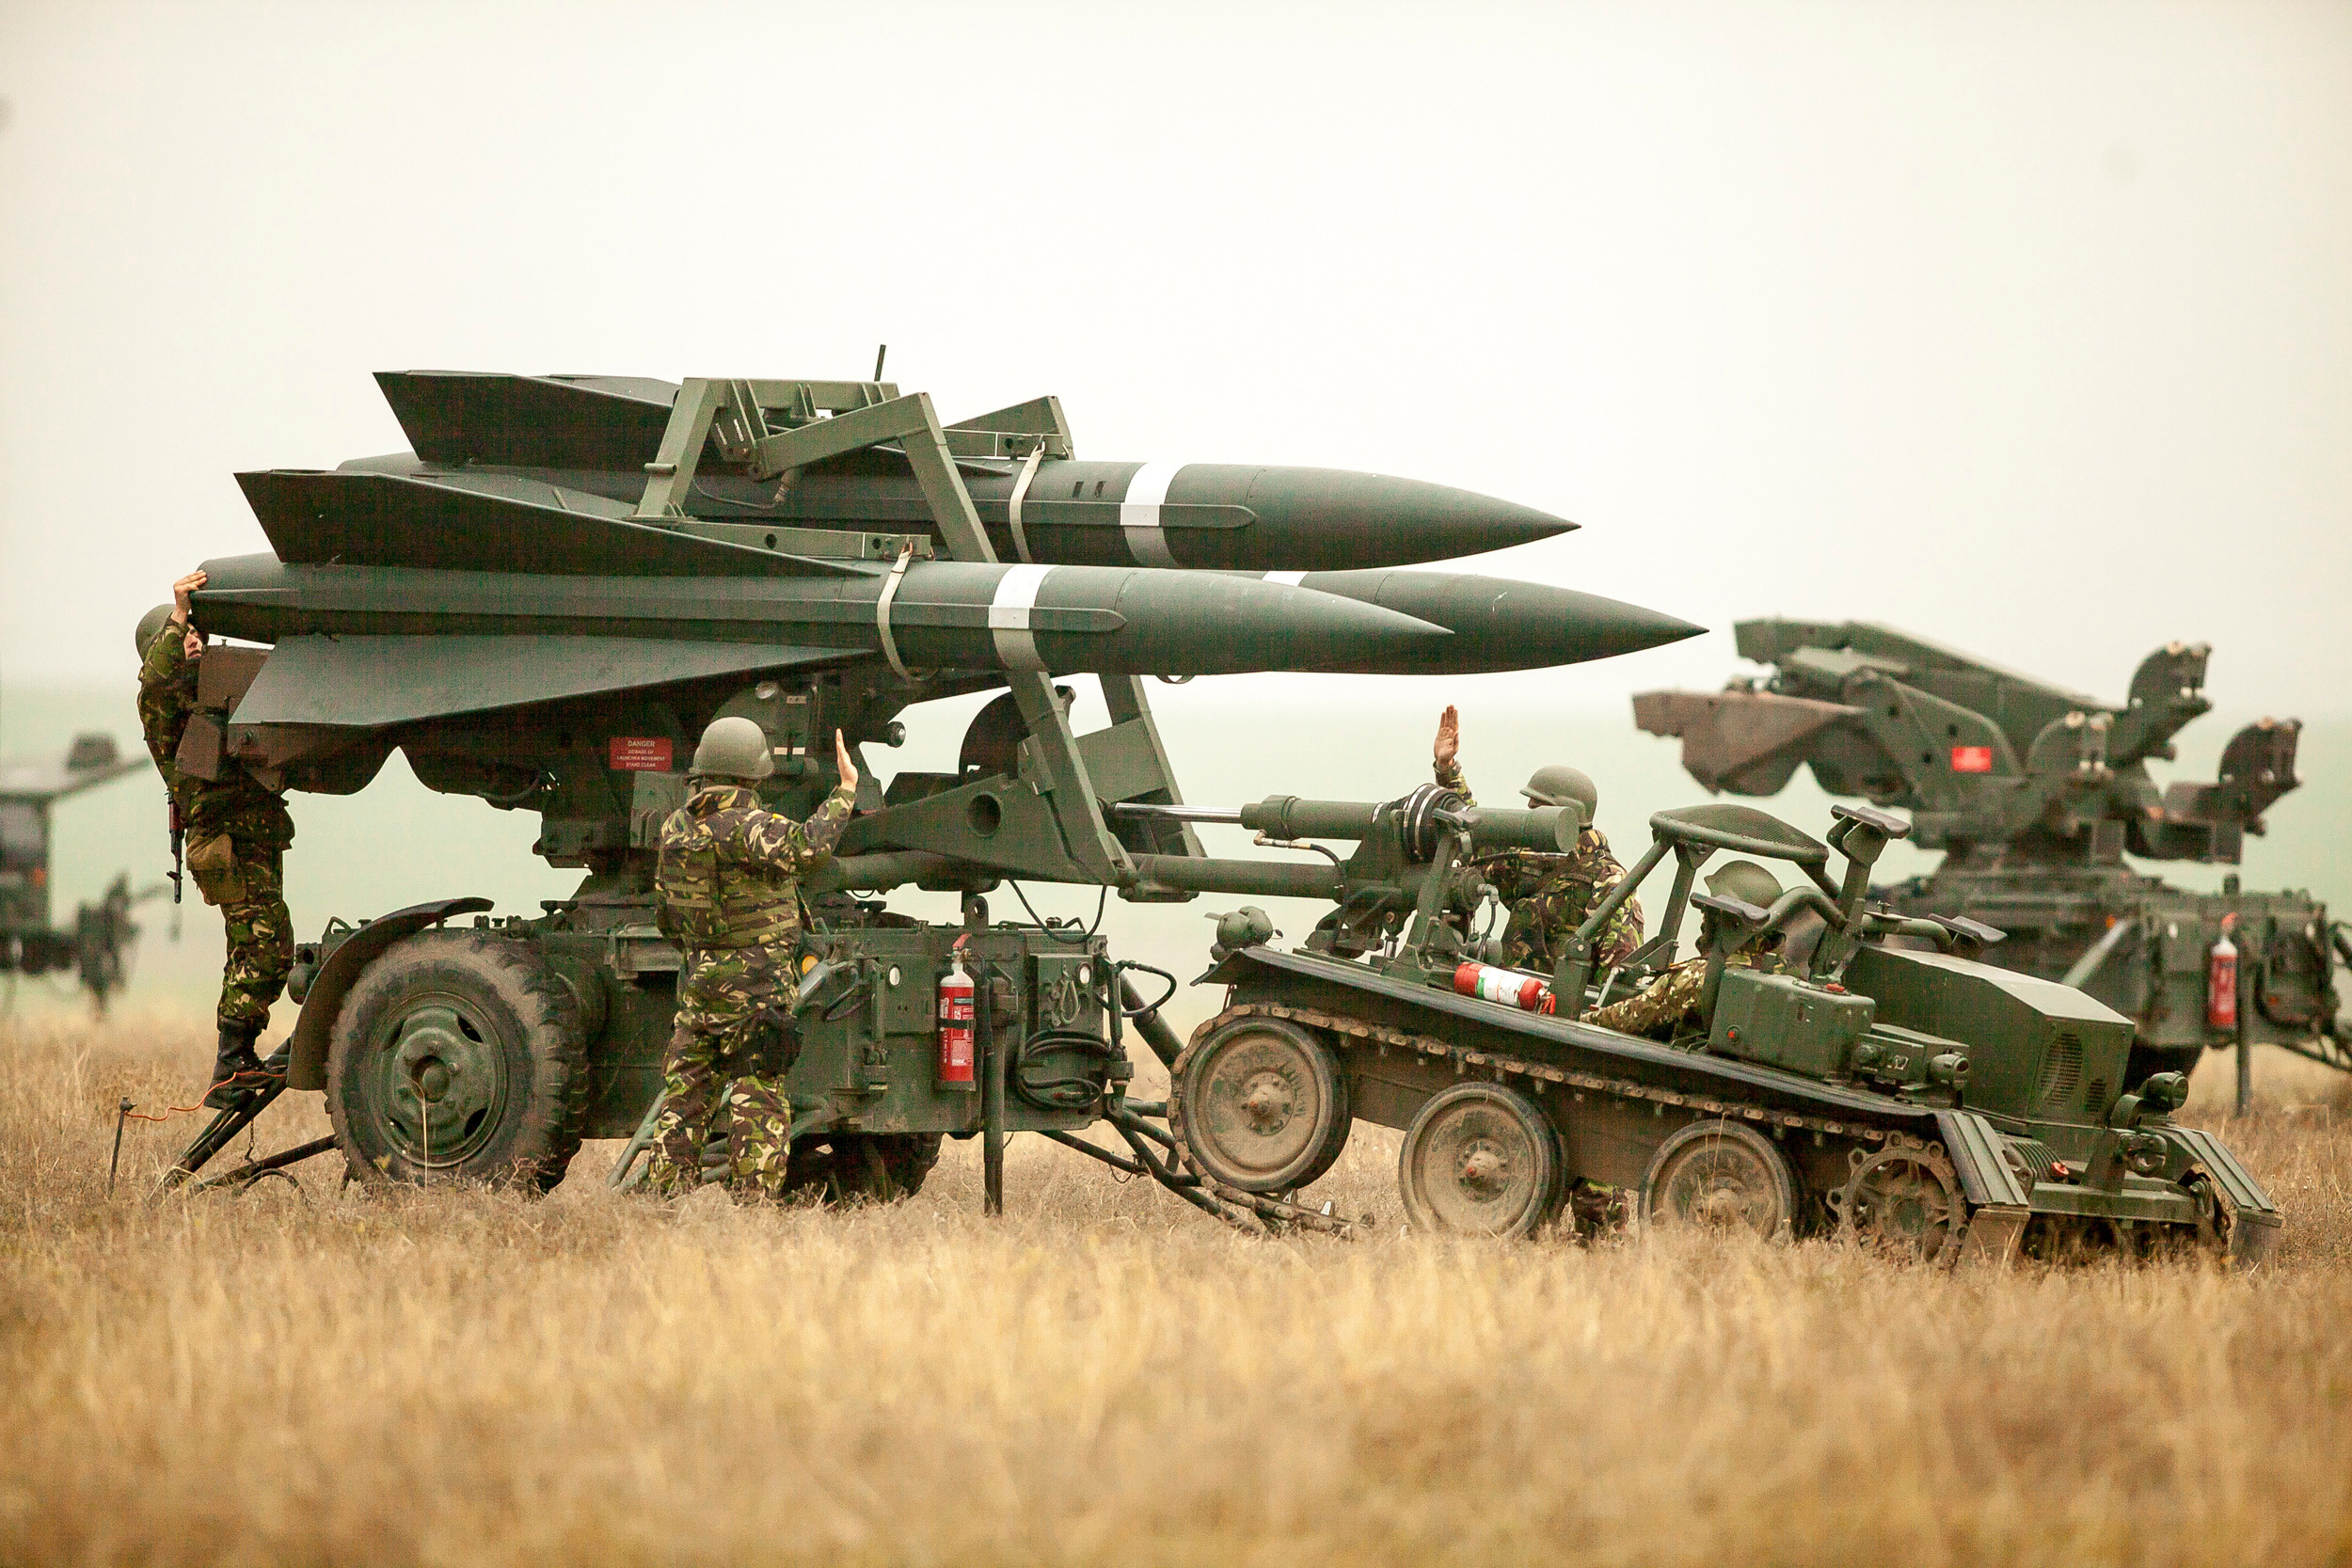 Romanian Army soldiers deploy a HAWK PIP III R ground-to-air missile launch pad during a joint military exercise with the US Army that aimed to test the interoperability of U.S. and Romanian armed forces in the event of a missile attack, near Corbu villag